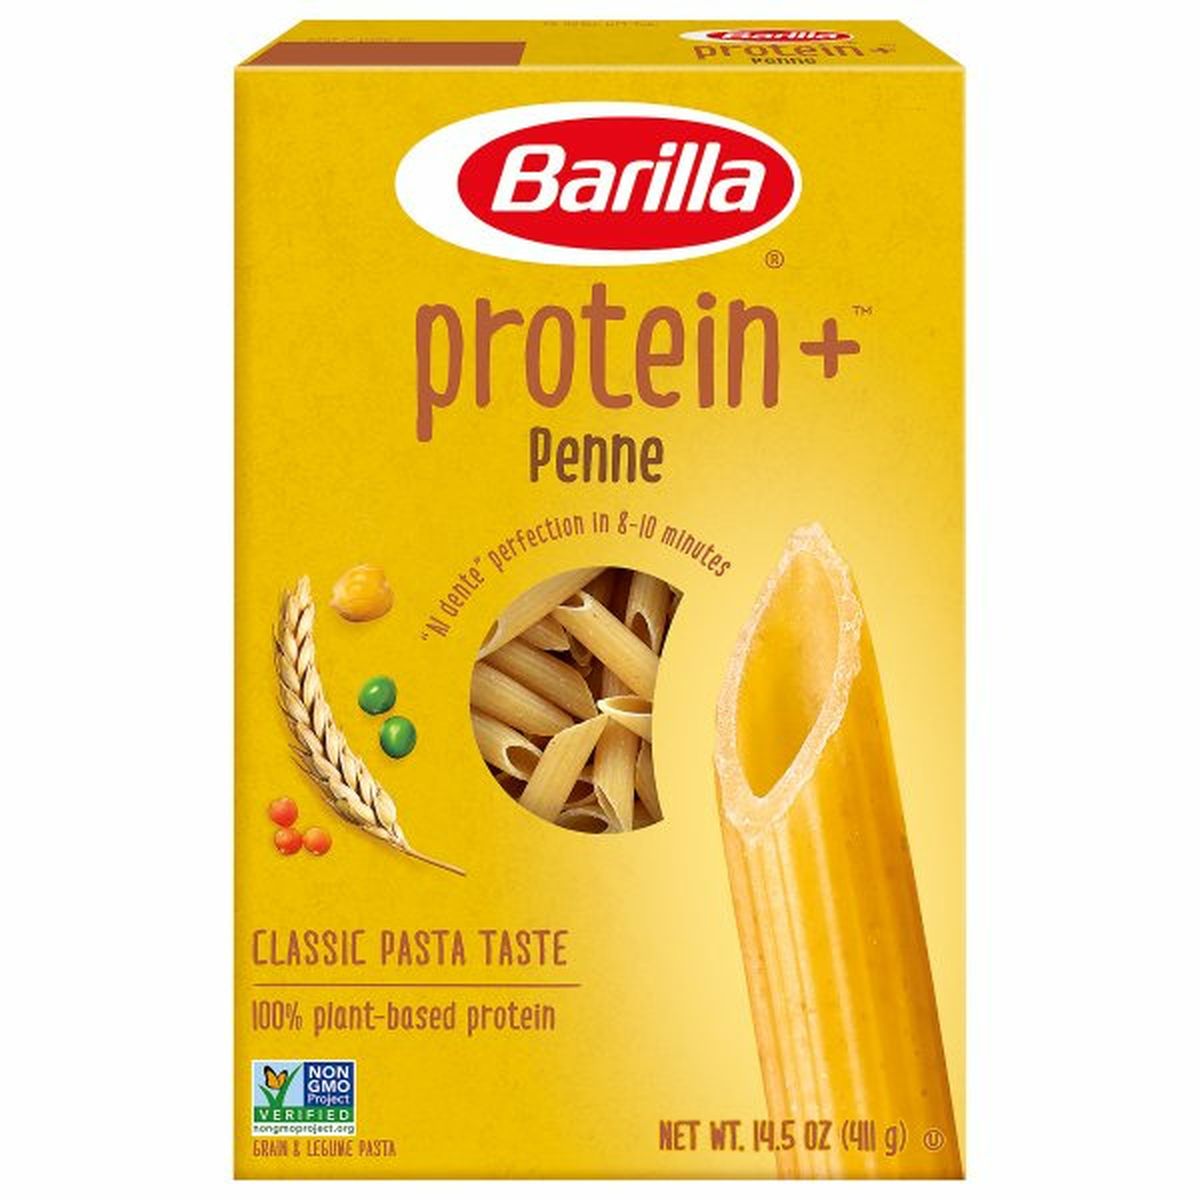 Calories in Barillas Protein+ Penne